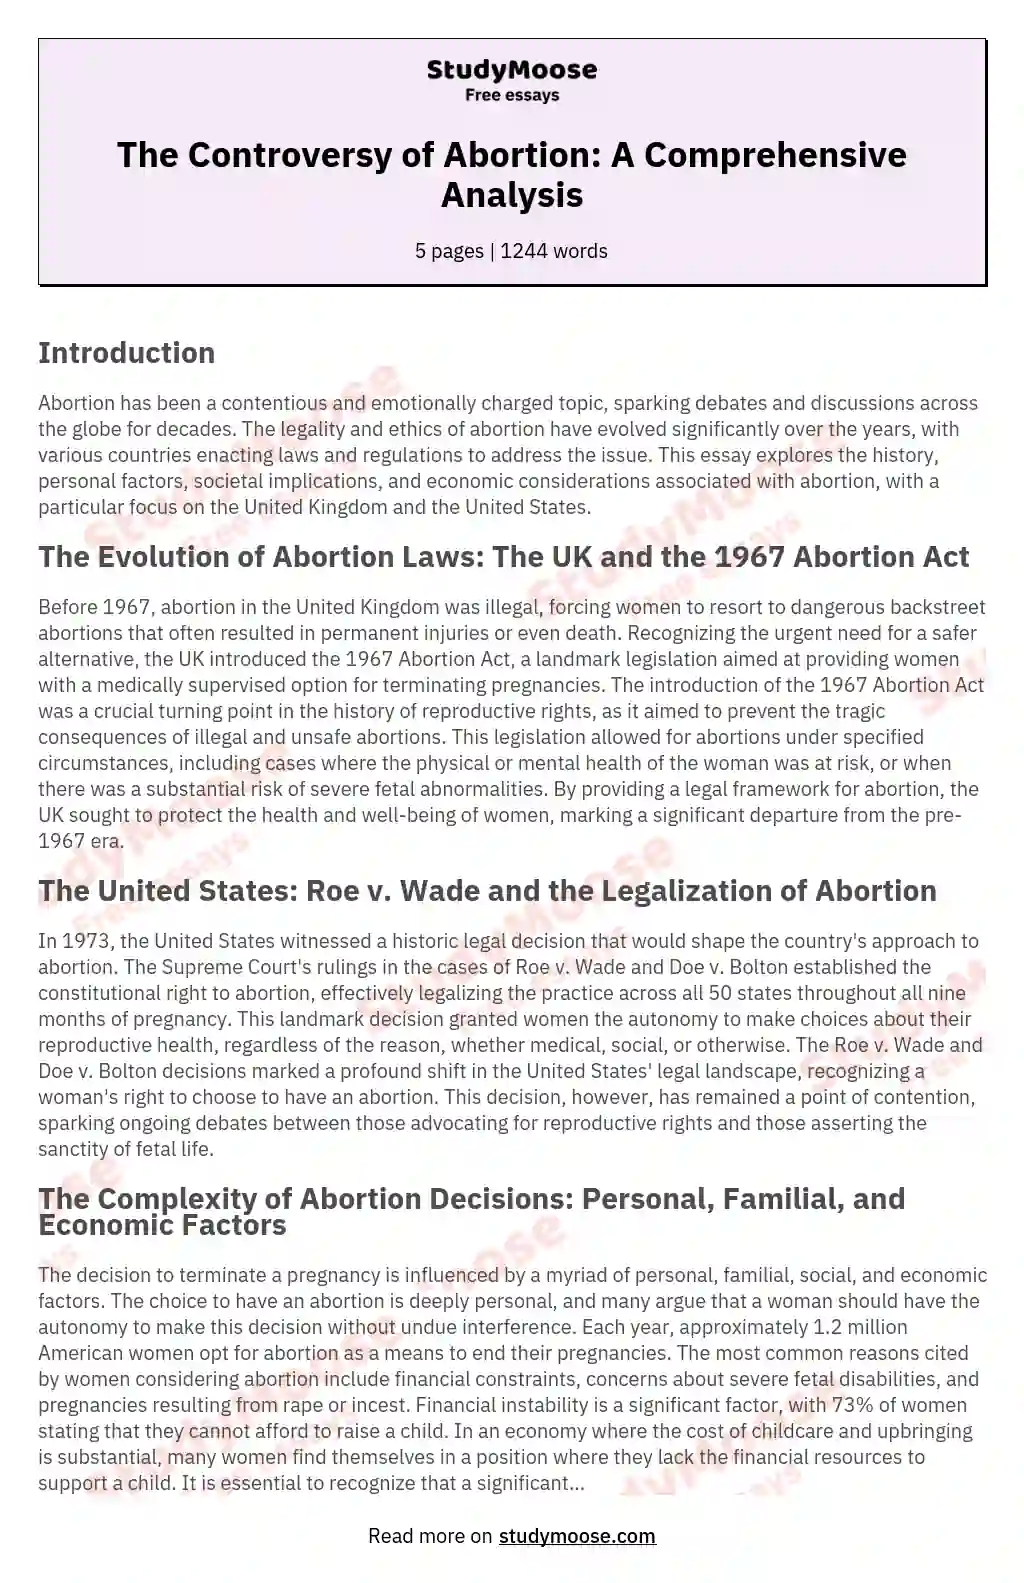 The Controversy of Abortion: A Comprehensive Analysis